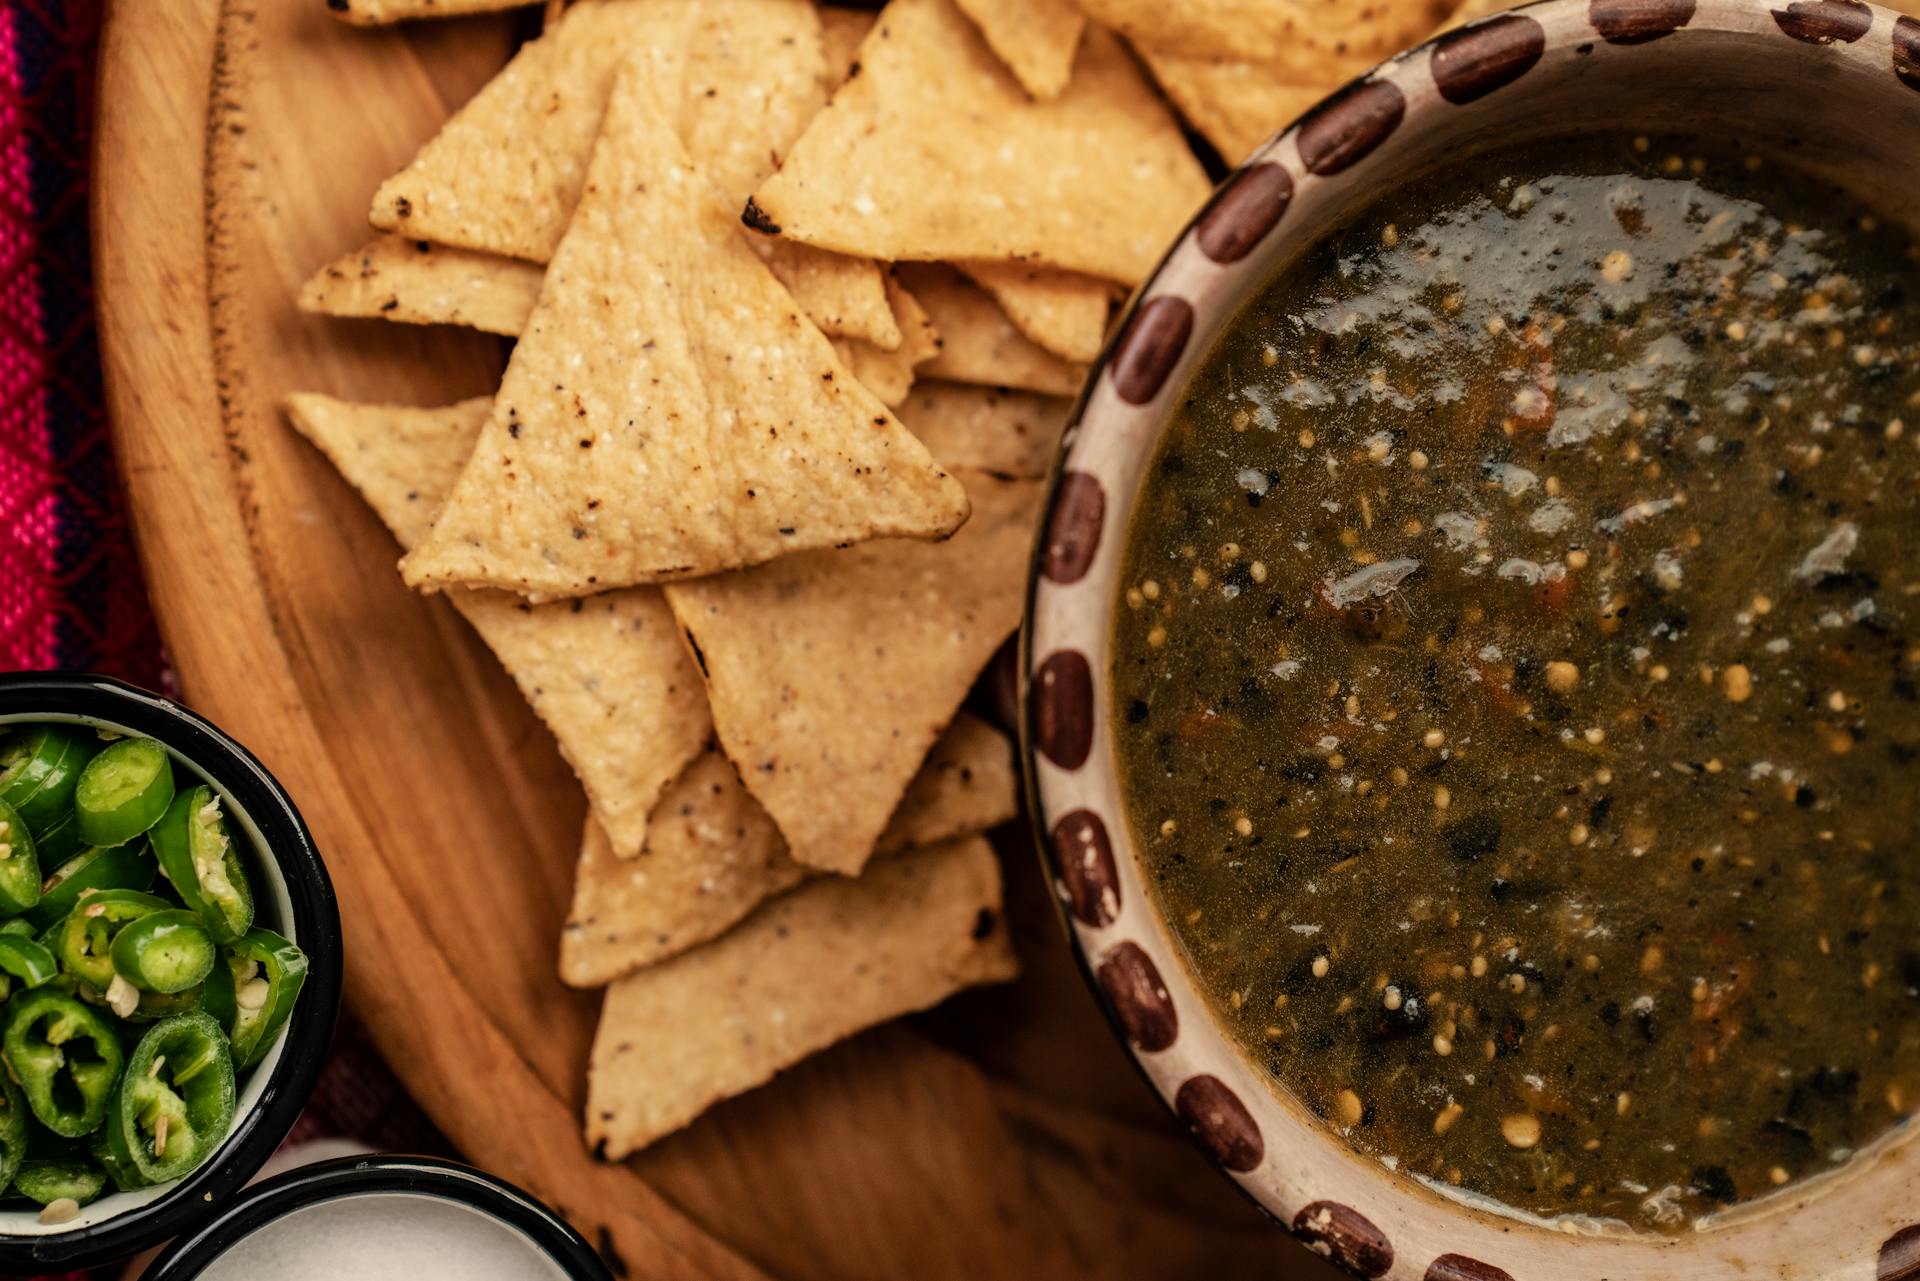 Salsa and chips | Source: Pexels